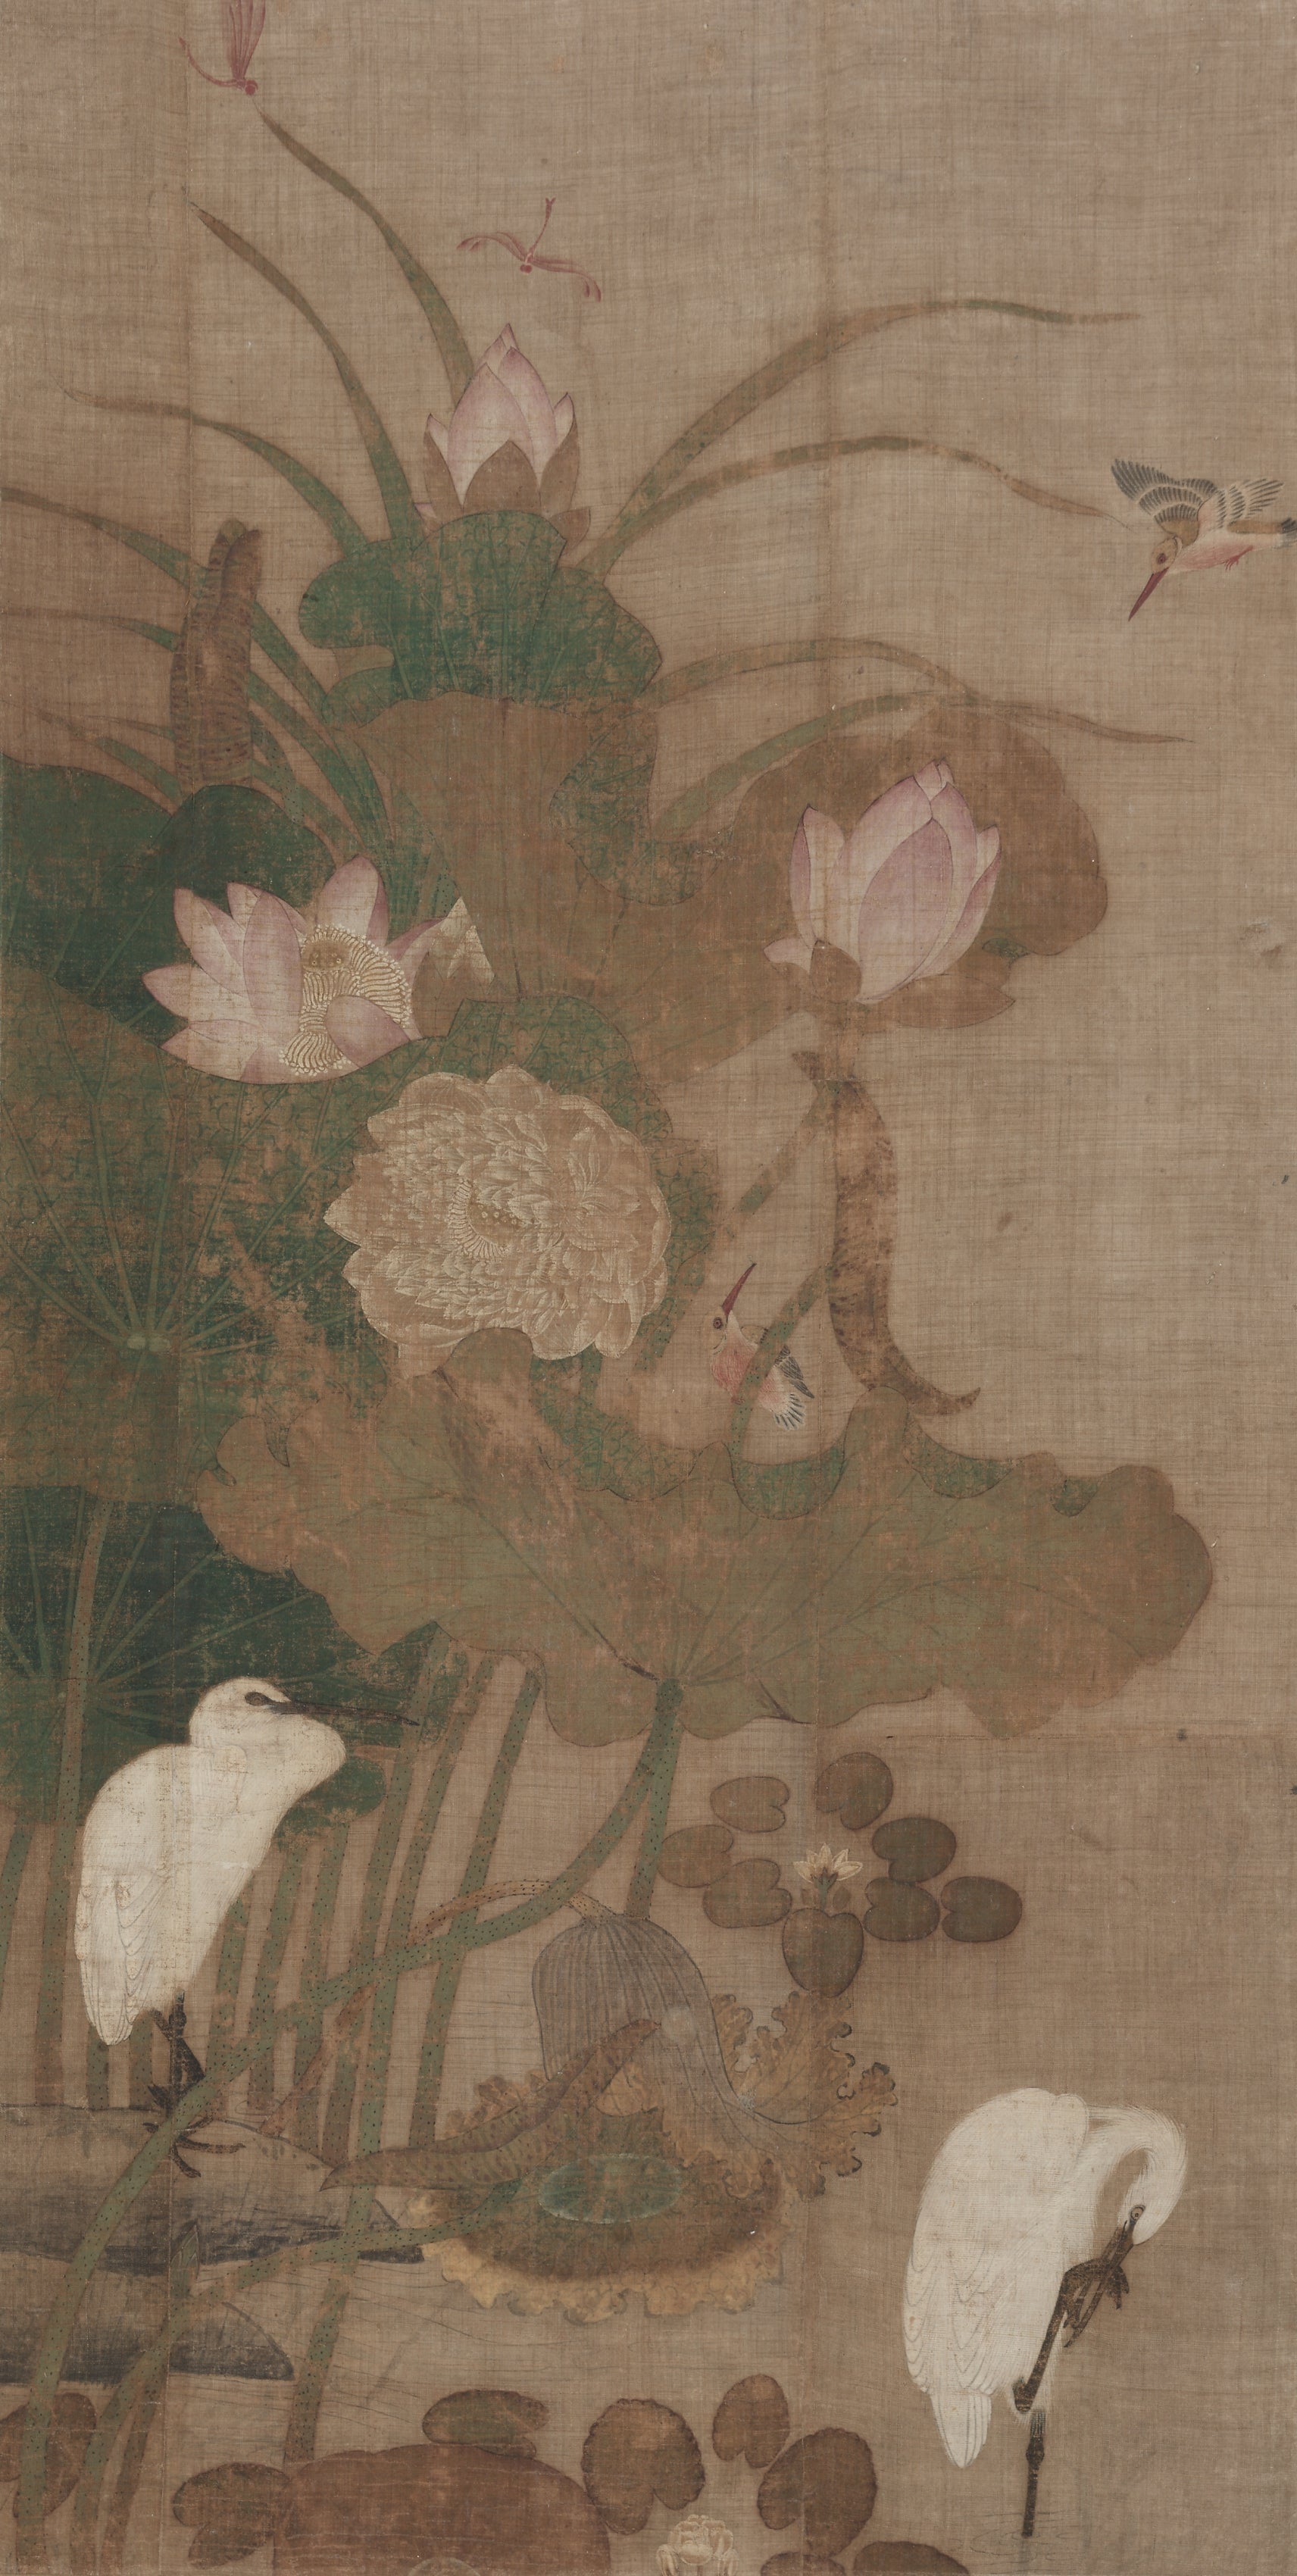 Lotuses, Insects, and Birds 연화백로도 (蓮花白鷺圖)